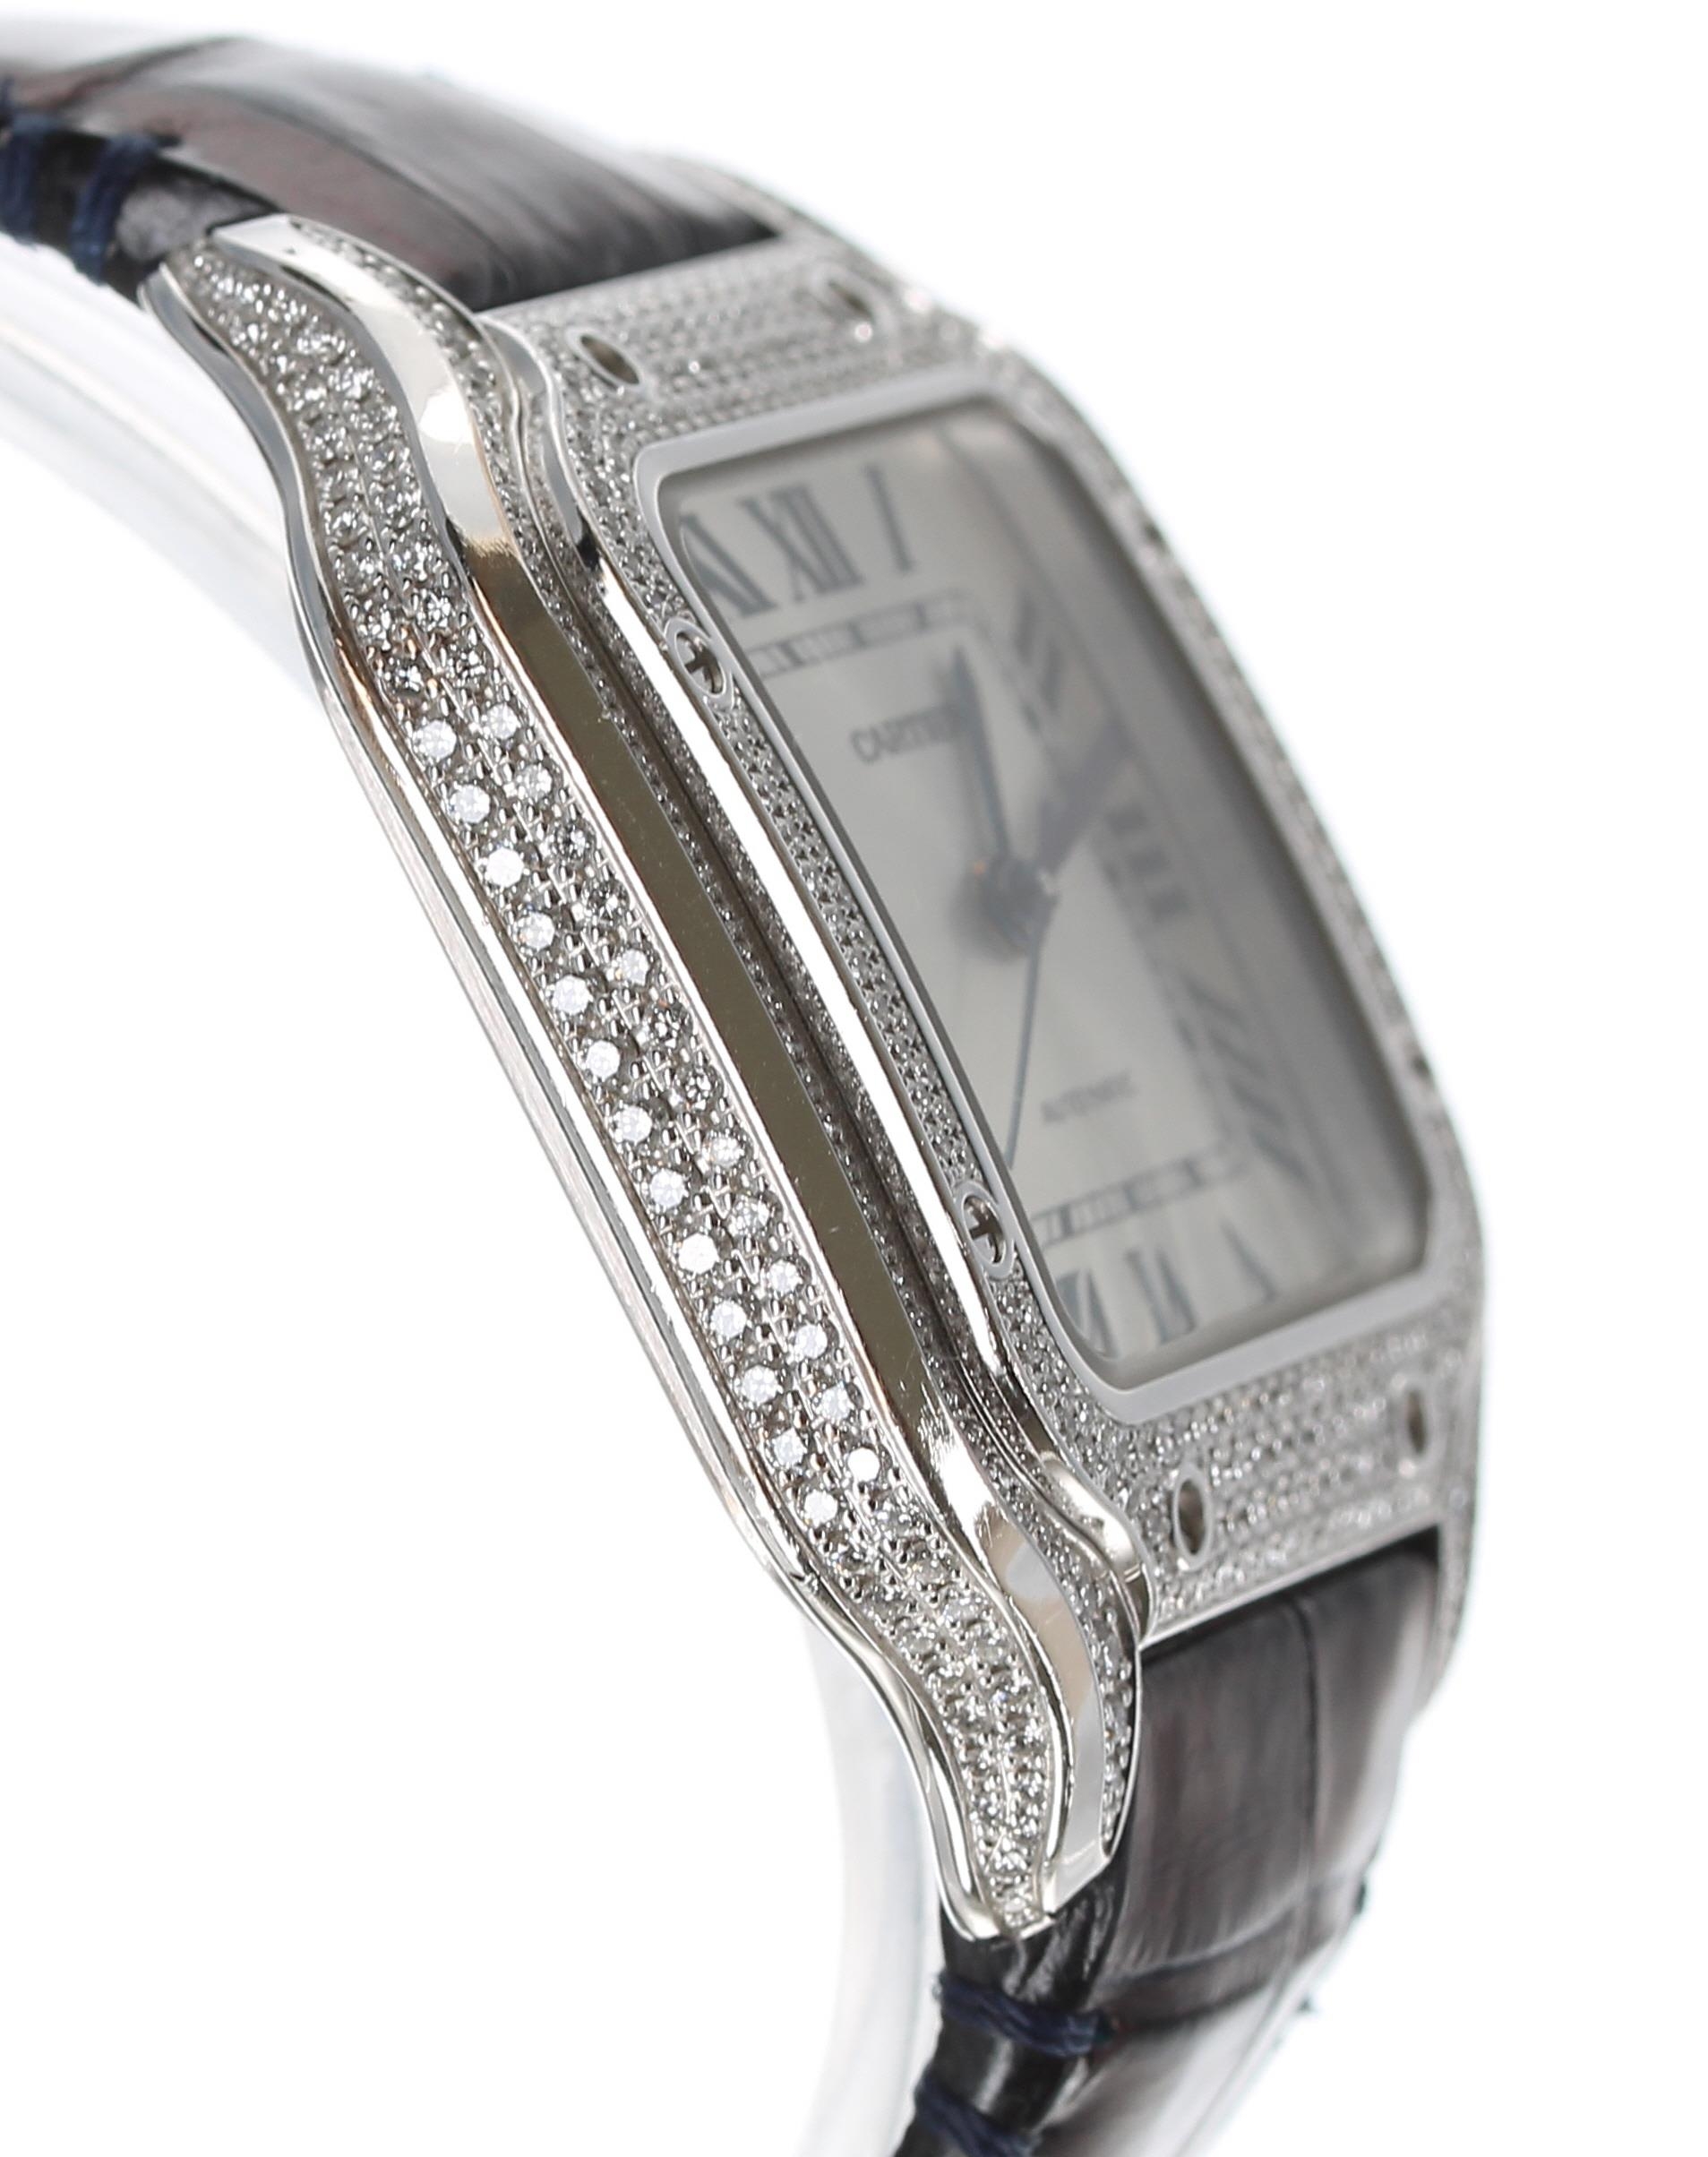 Cartier Santos 18ct white gold diamond set automatic wristwatch, reference no. 4190, serial no. - Image 3 of 4